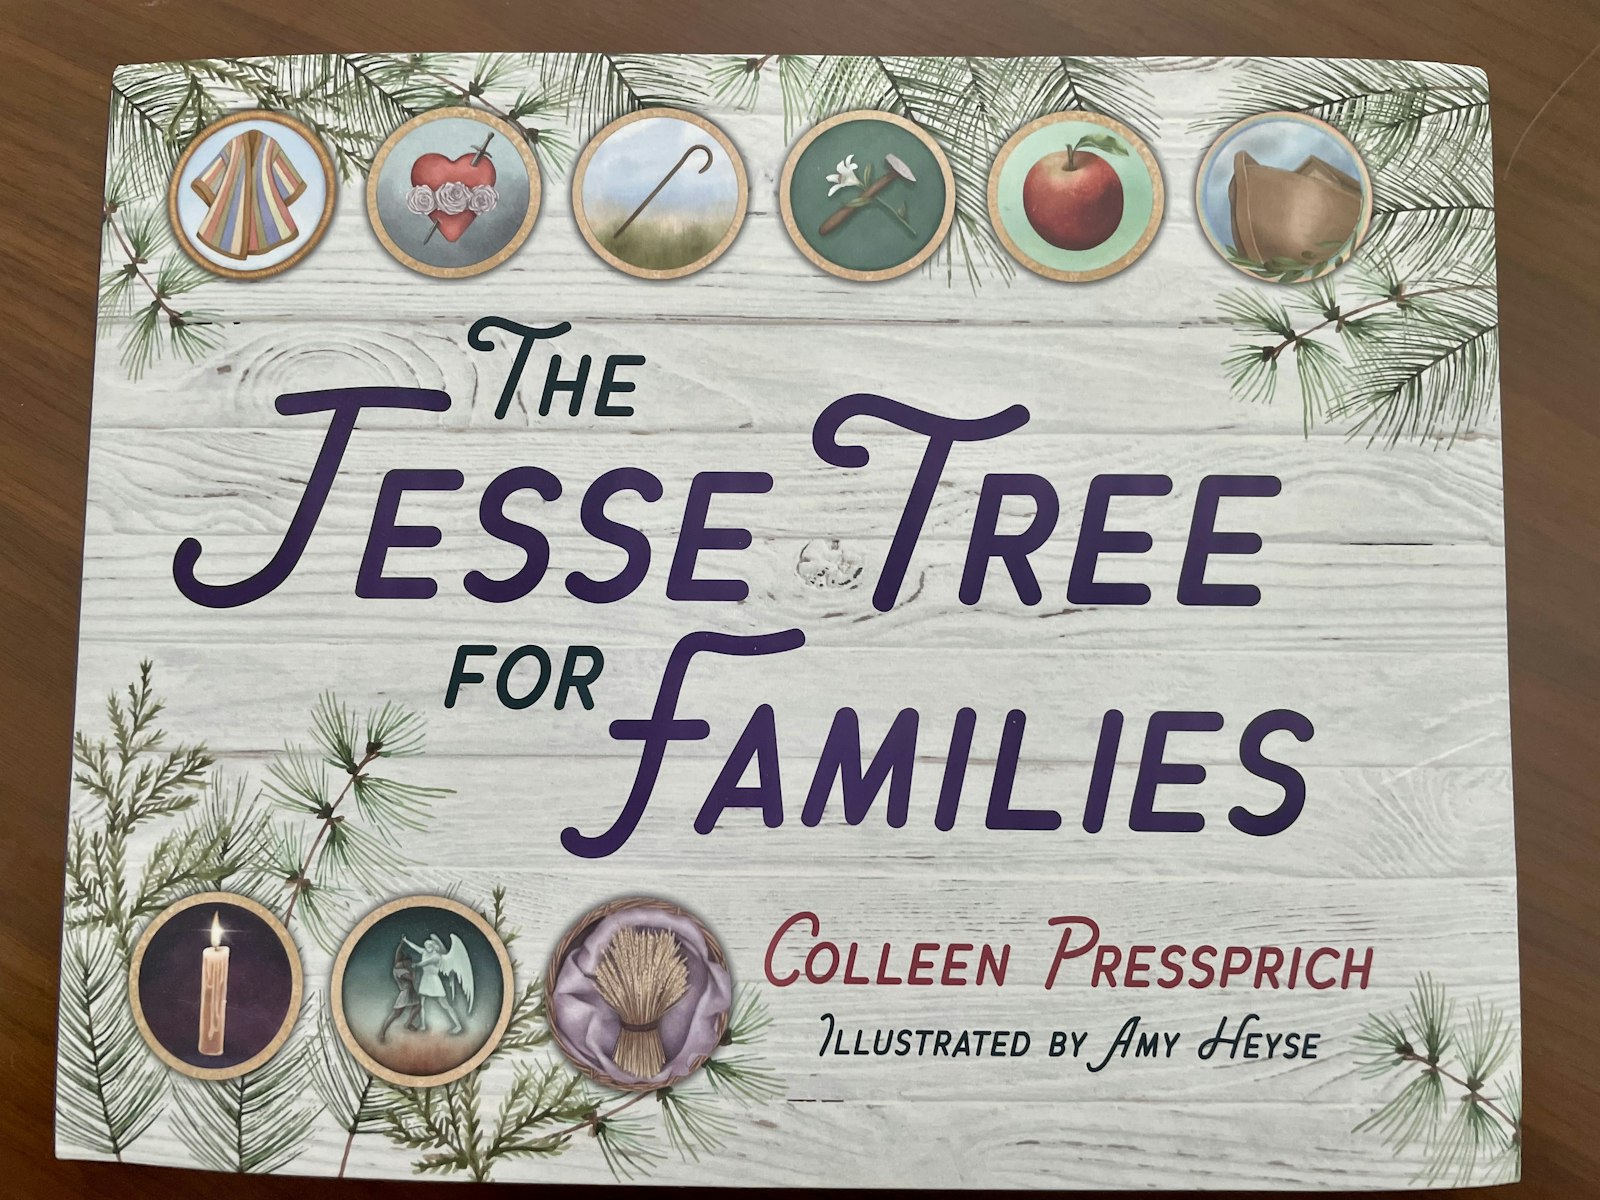 In her book, Pressprich included paper Jesse Tree ornaments for families to use alongside the written reflections.